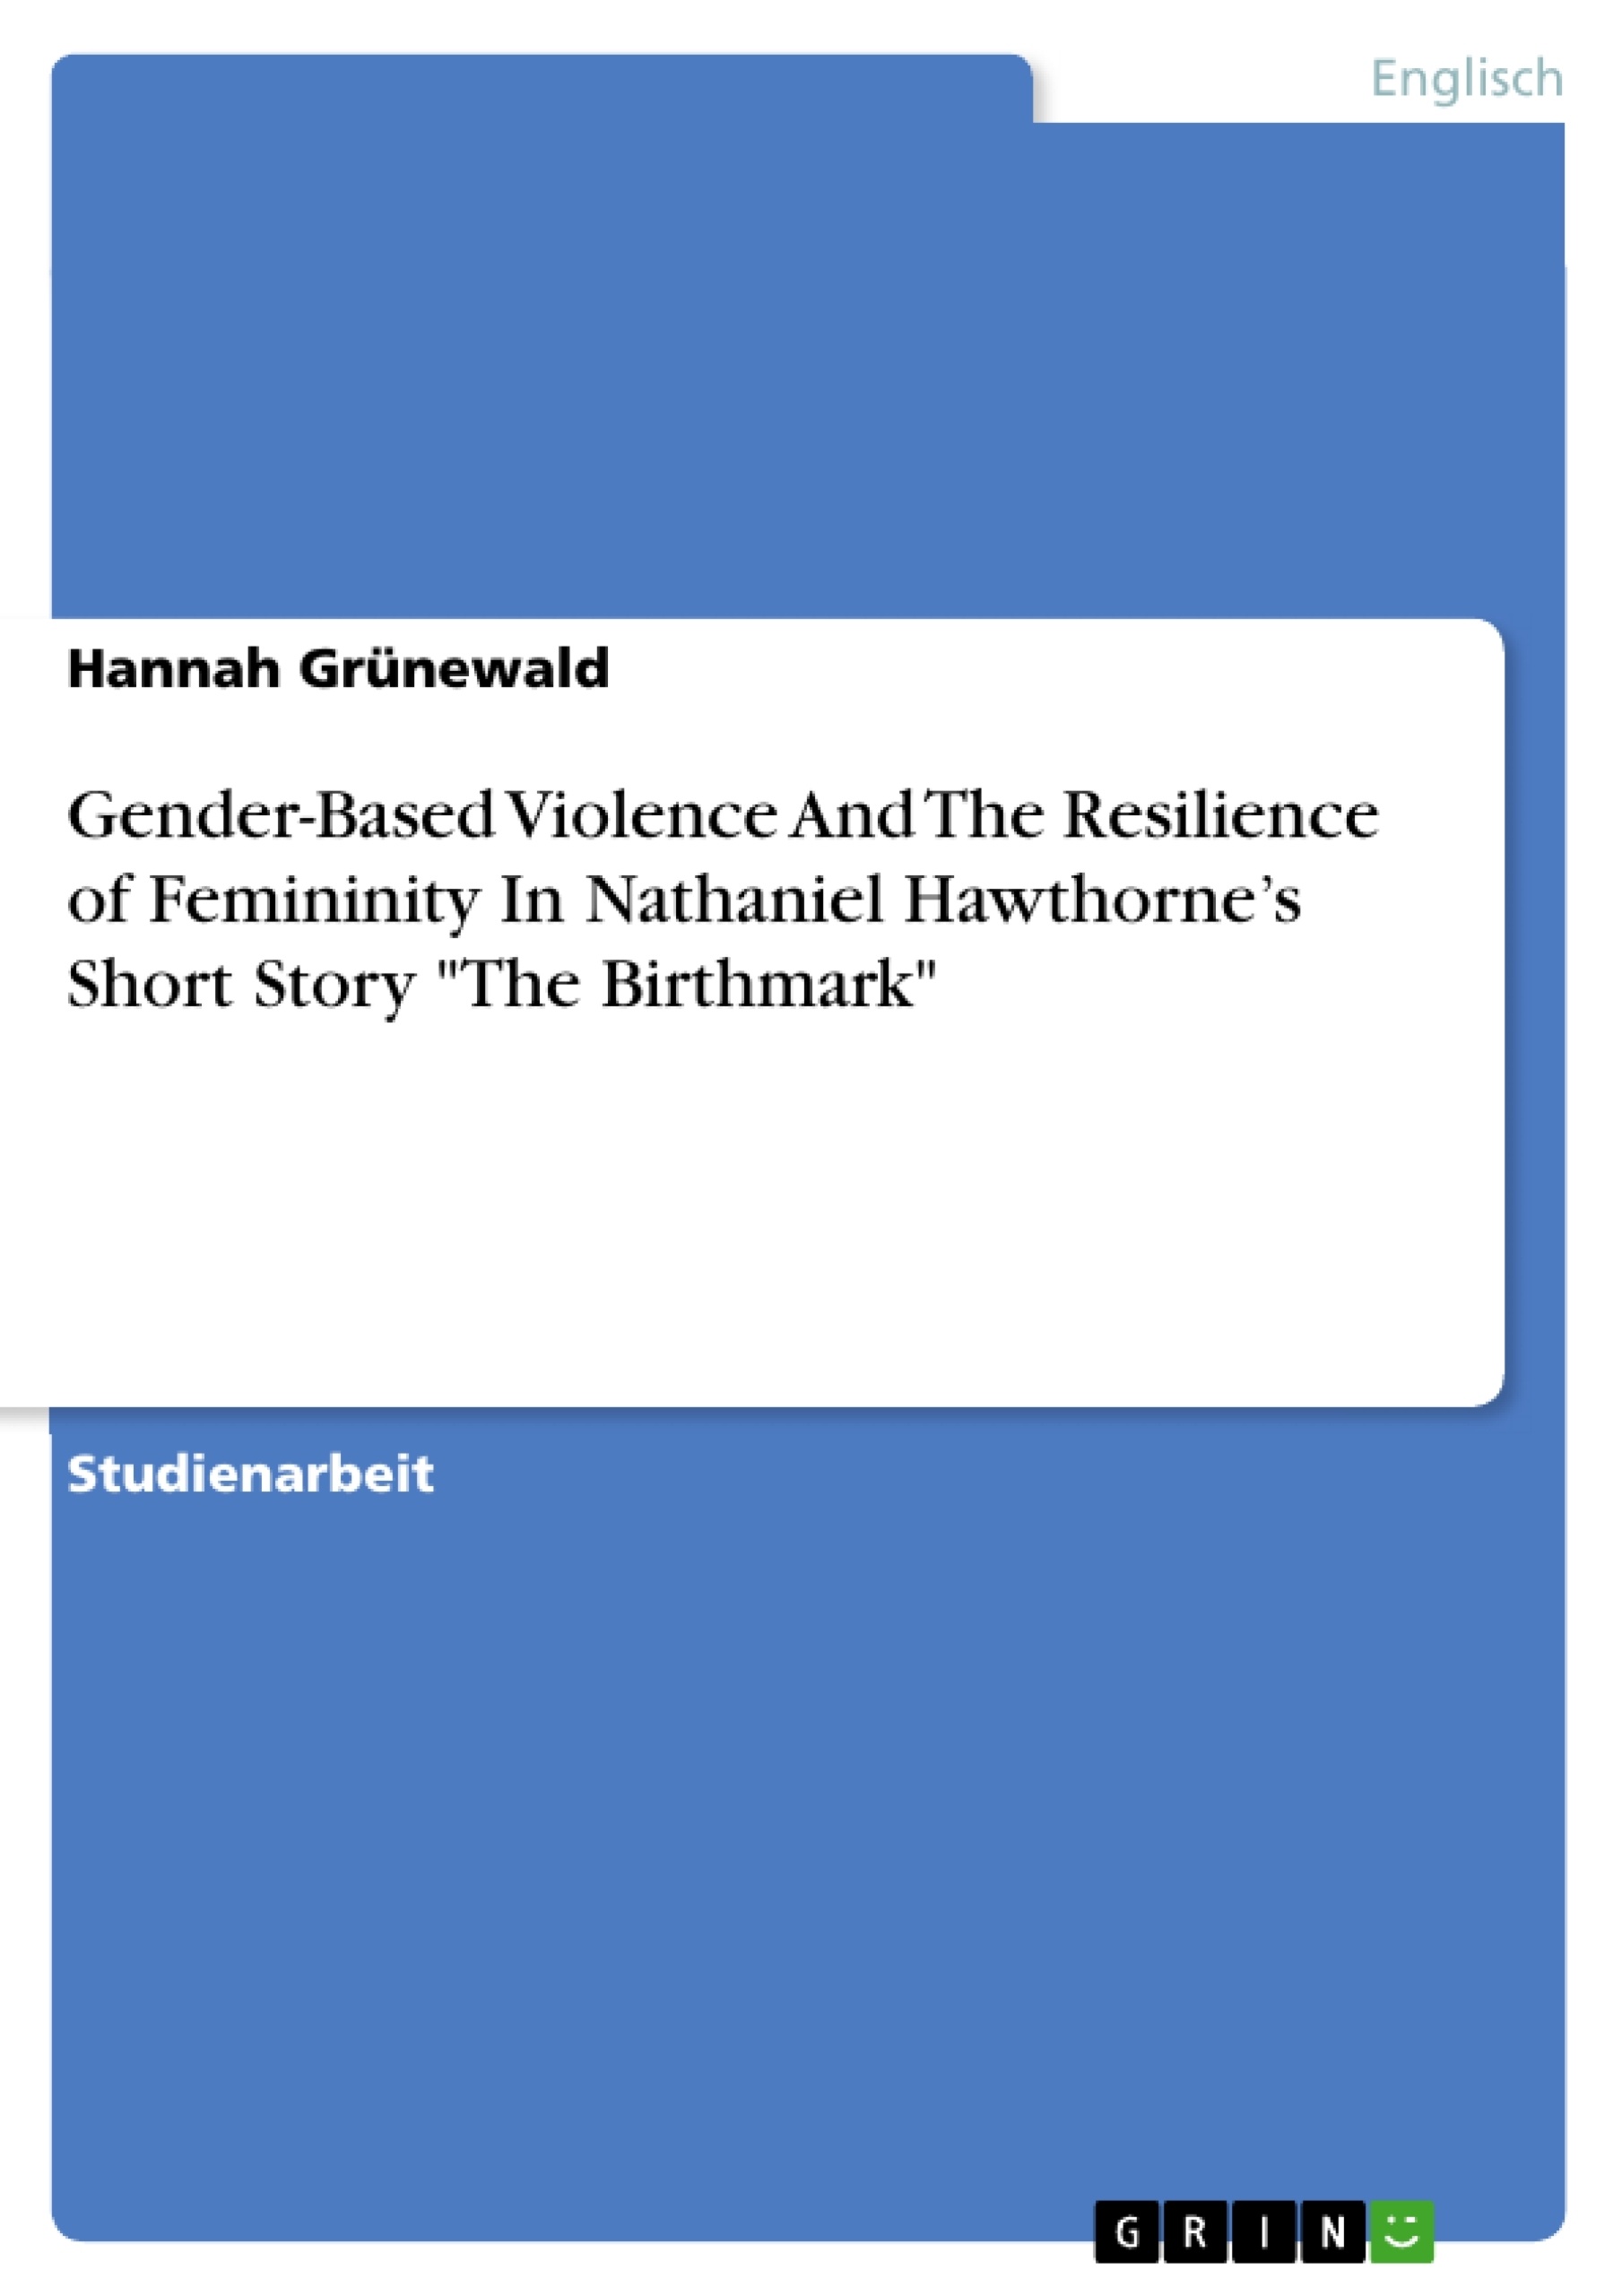 Título: Gender-Based Violence And The Resilience of Femininity In Nathaniel Hawthorne’s Short Story "The Birthmark"